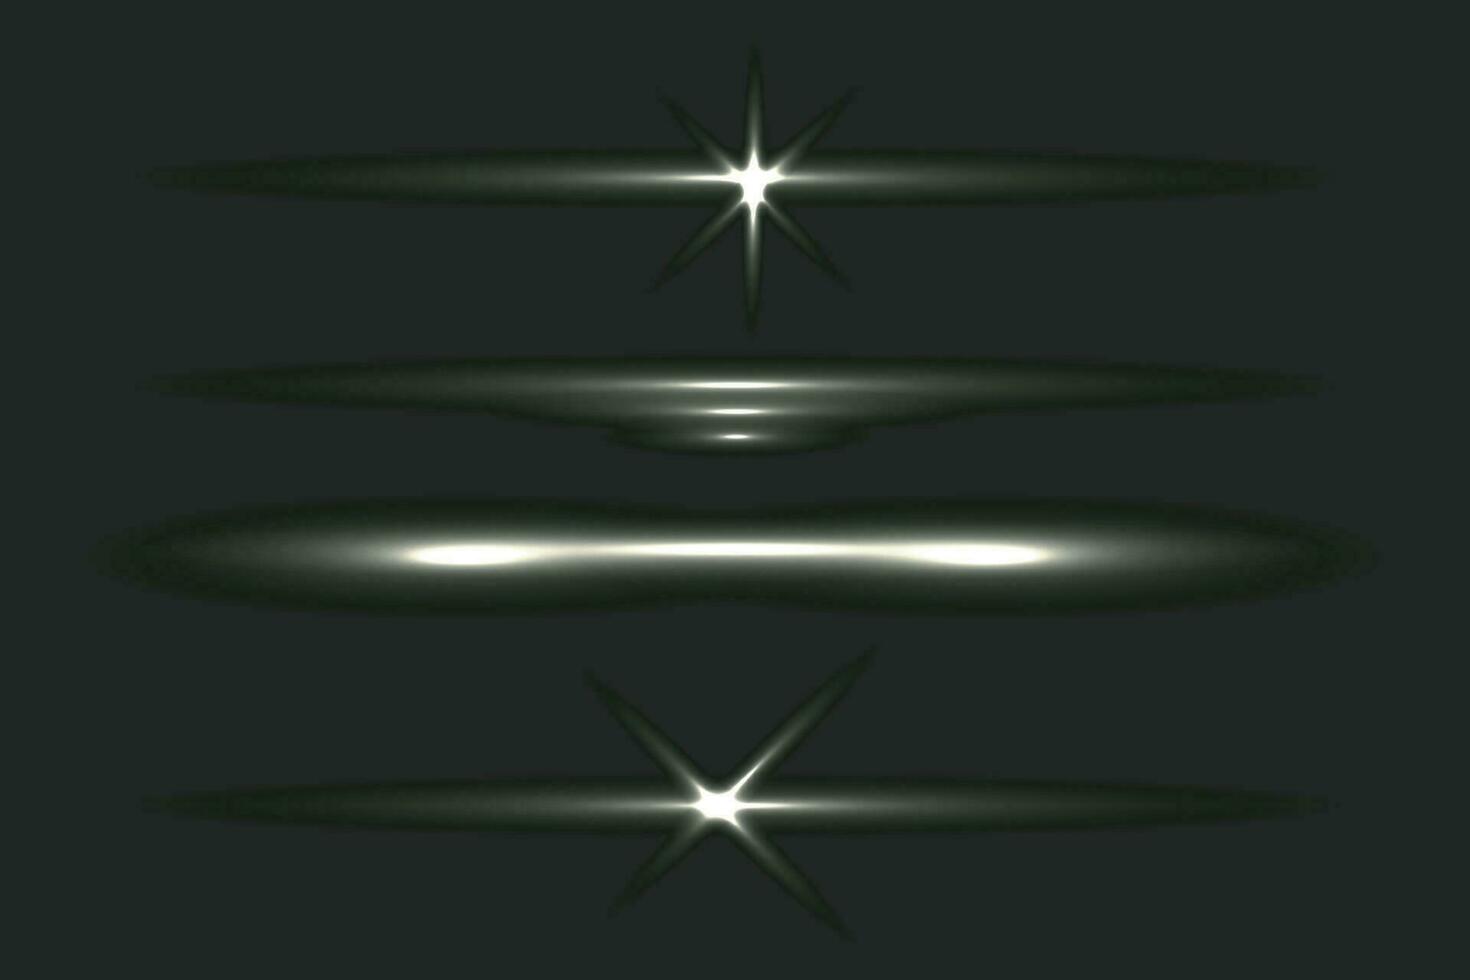 Flash light on black background. Vector glow sparkle effect. Abstract lens flare ignition. Flashing lights Vector Collection